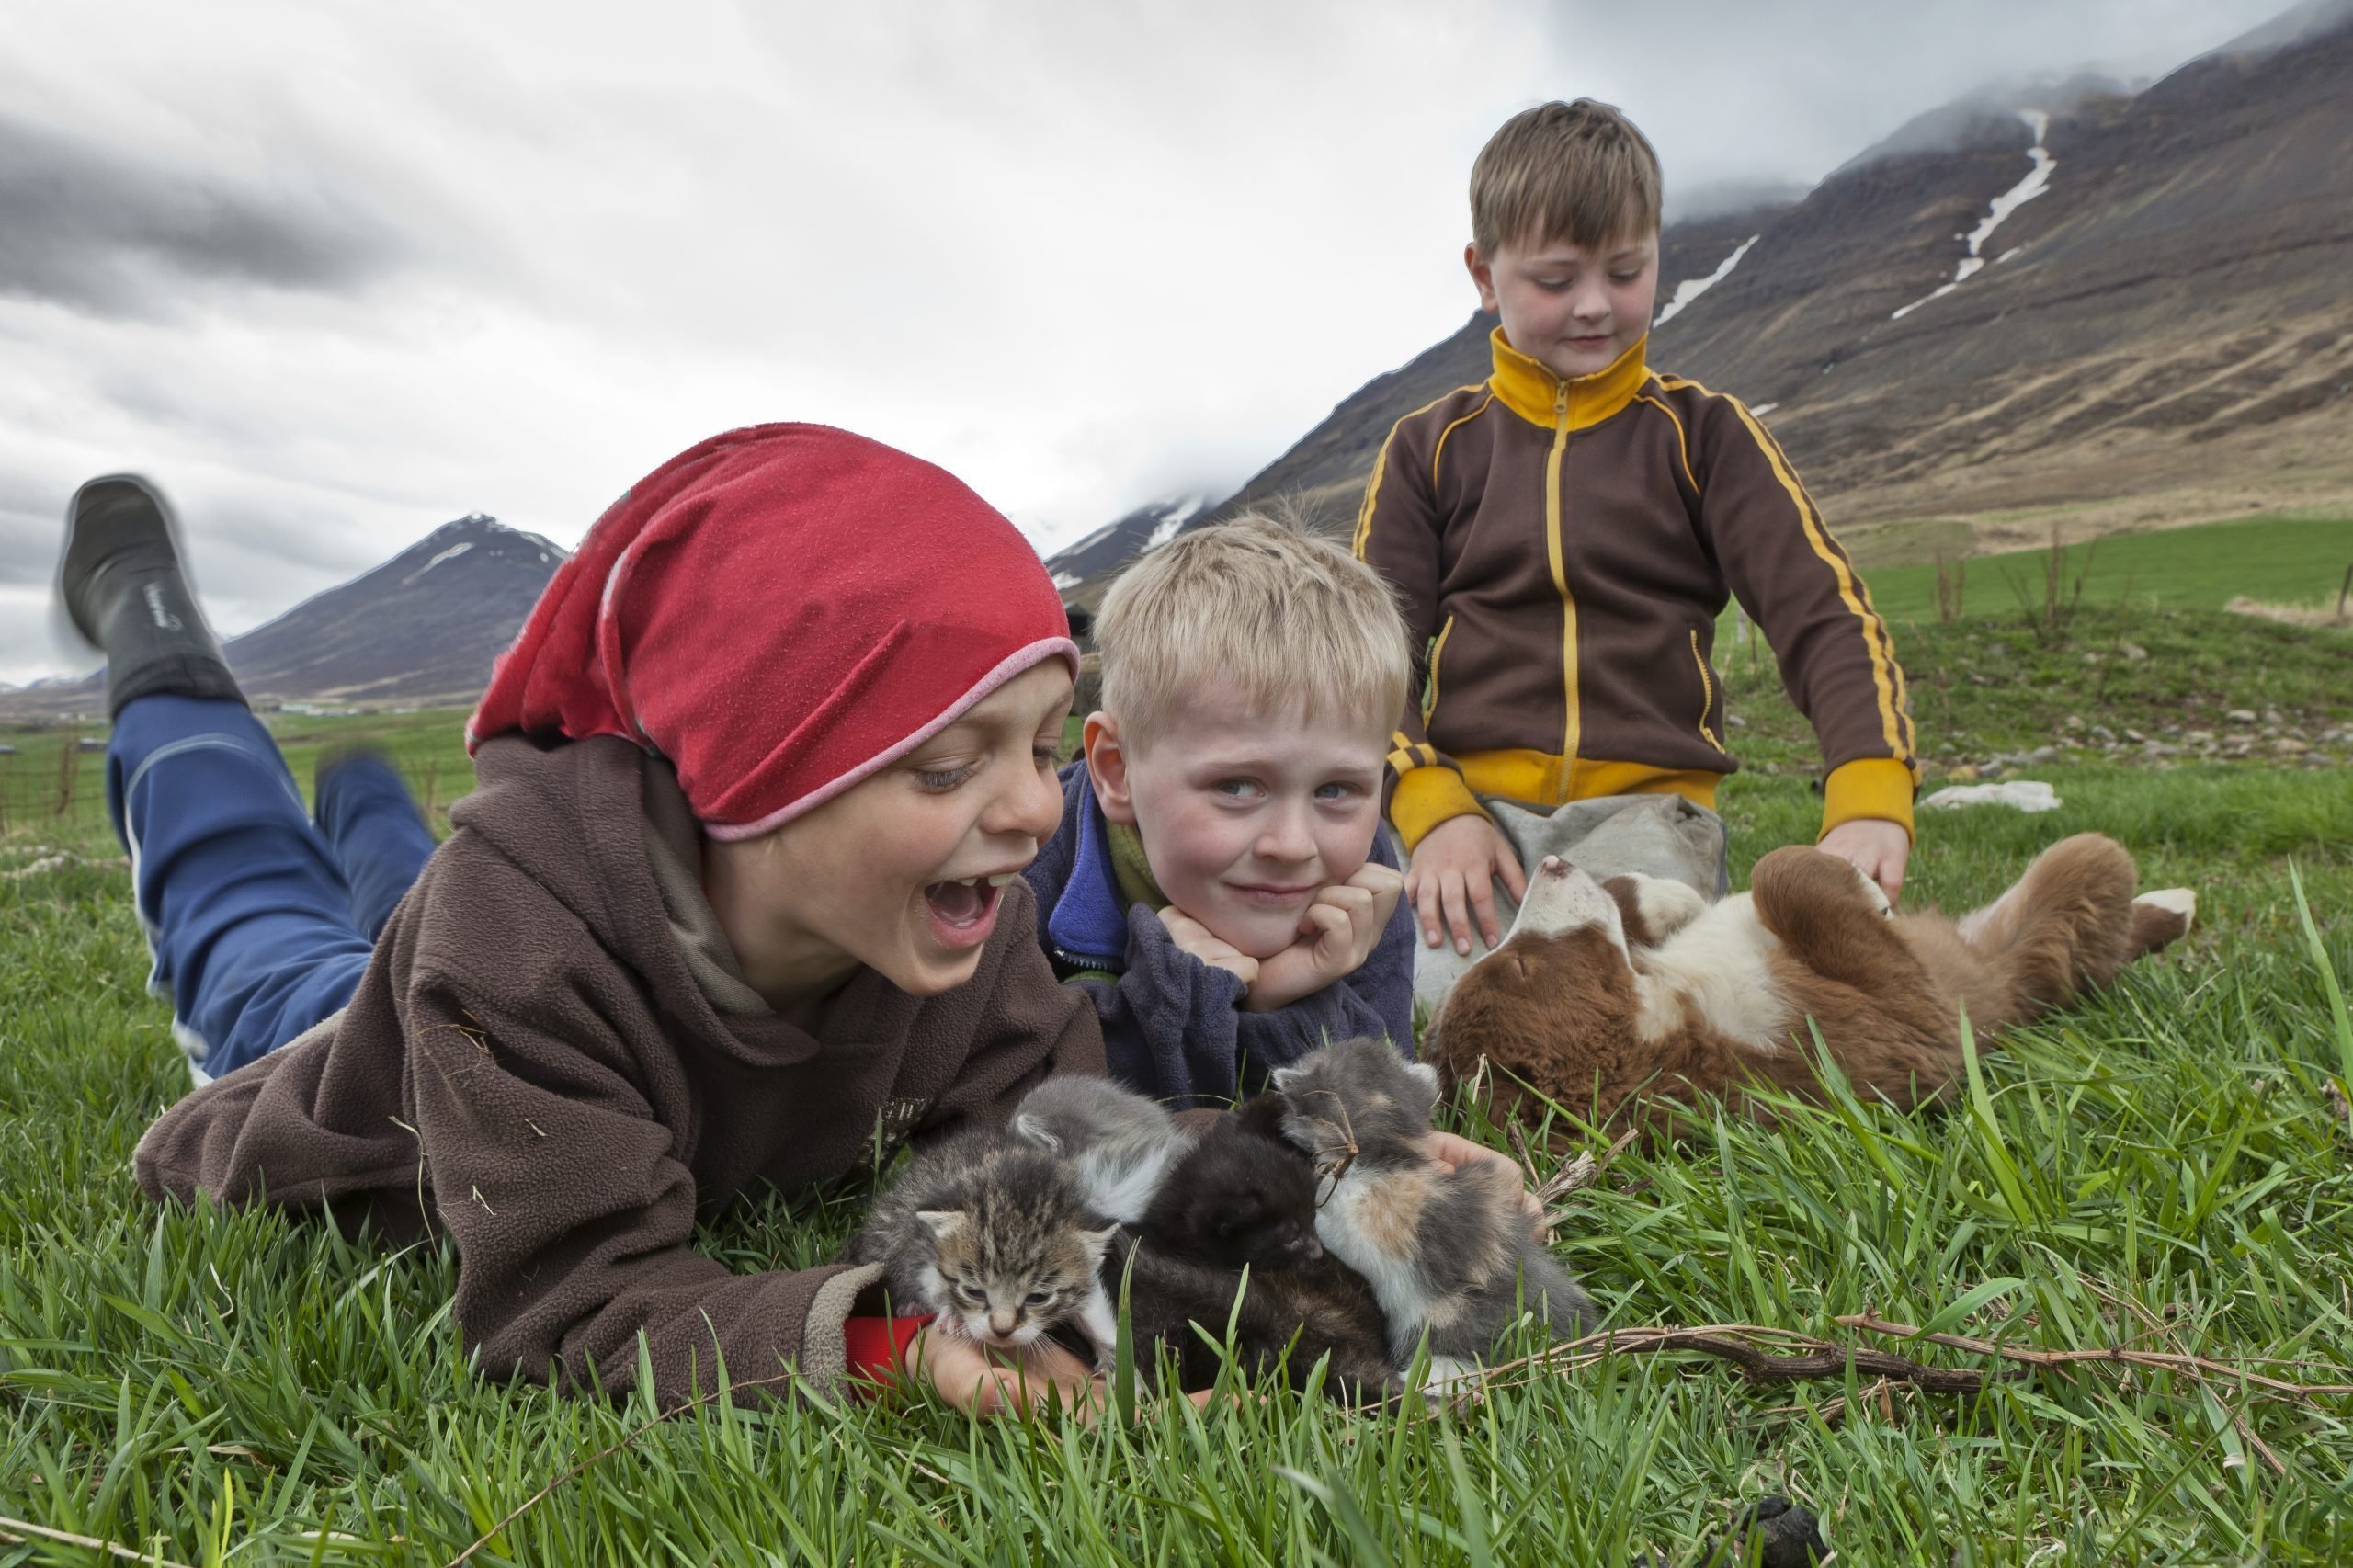 Boys with kittens and puppy on farm, Eyjafjordur, Iceland